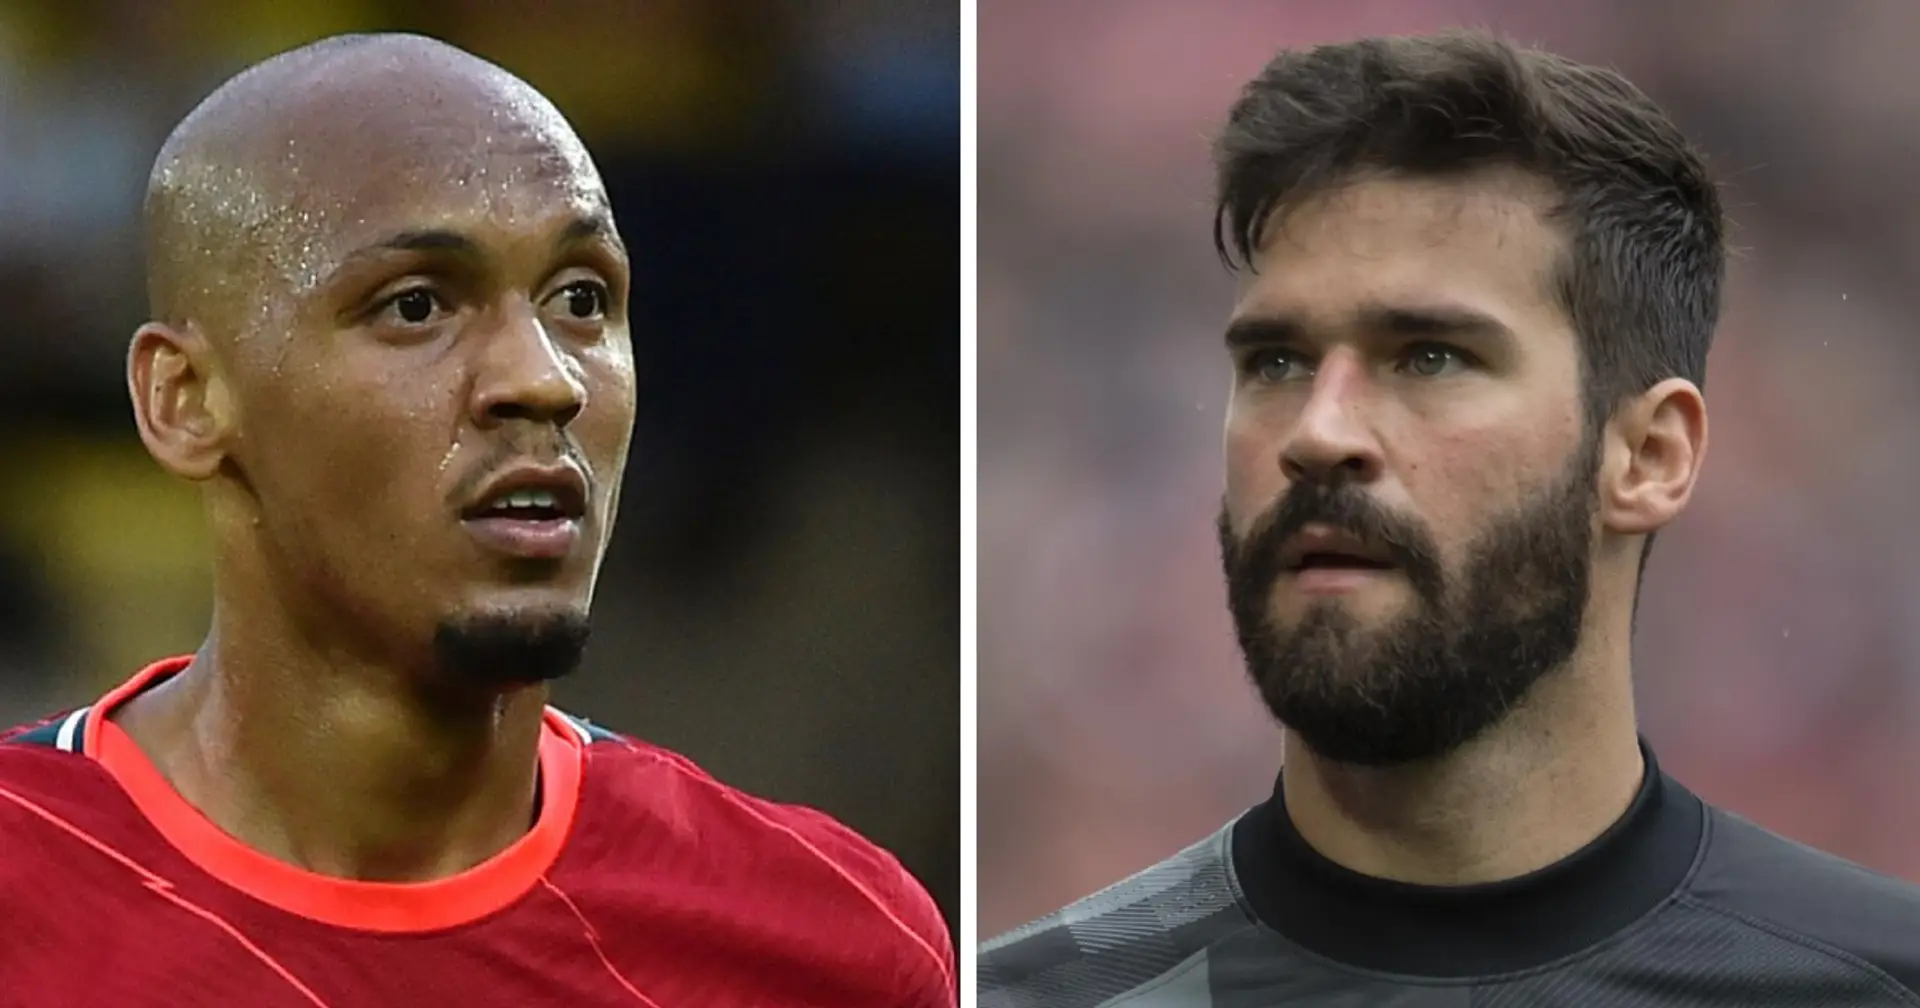 'I don't think we'll play': Fabinho rules himself and Alisson out of Watford game